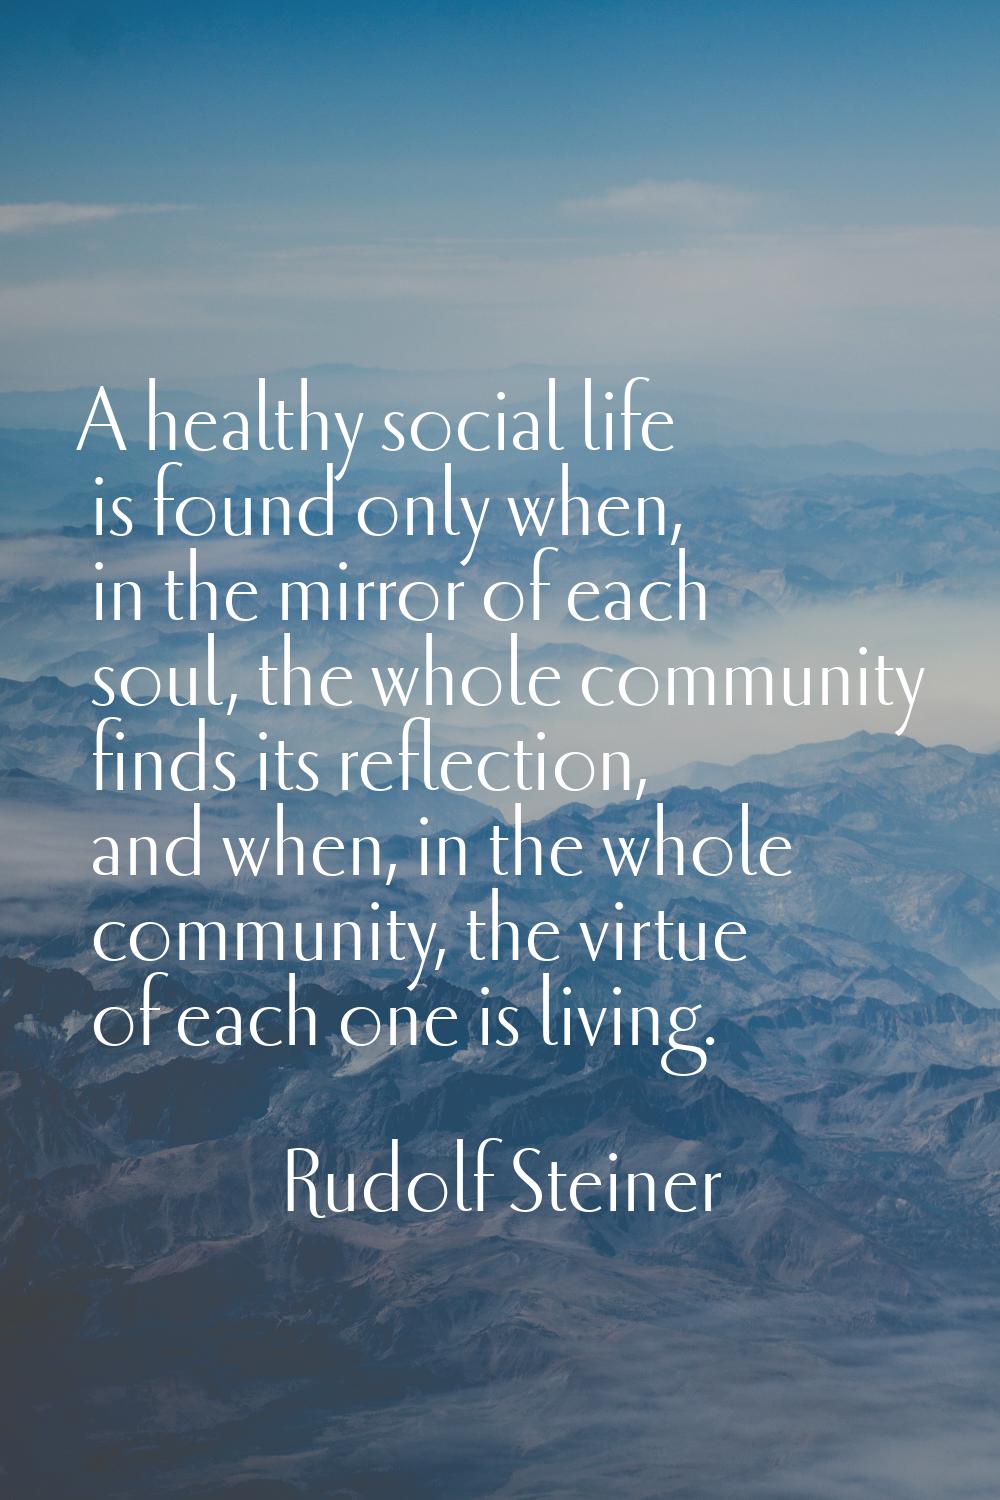 A healthy social life is found only when, in the mirror of each soul, the whole community finds its